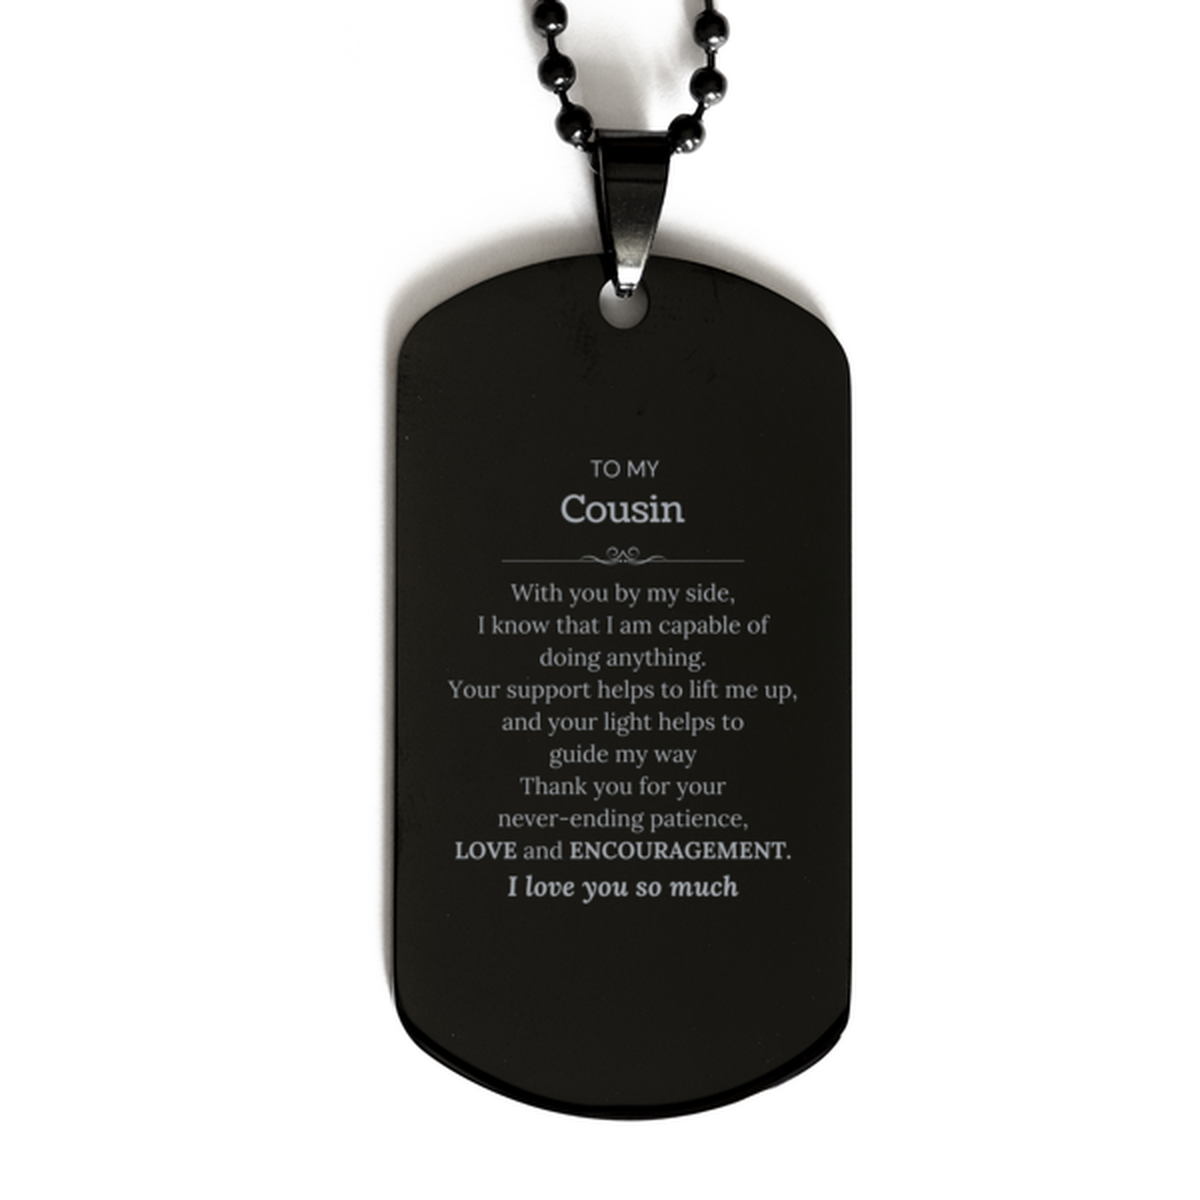 Appreciation Cousin Black Dog Tag Gifts, To My Cousin Birthday Christmas Wedding Keepsake Gifts for Cousin With you by my side, I know that I am capable of doing anything. I love you so much